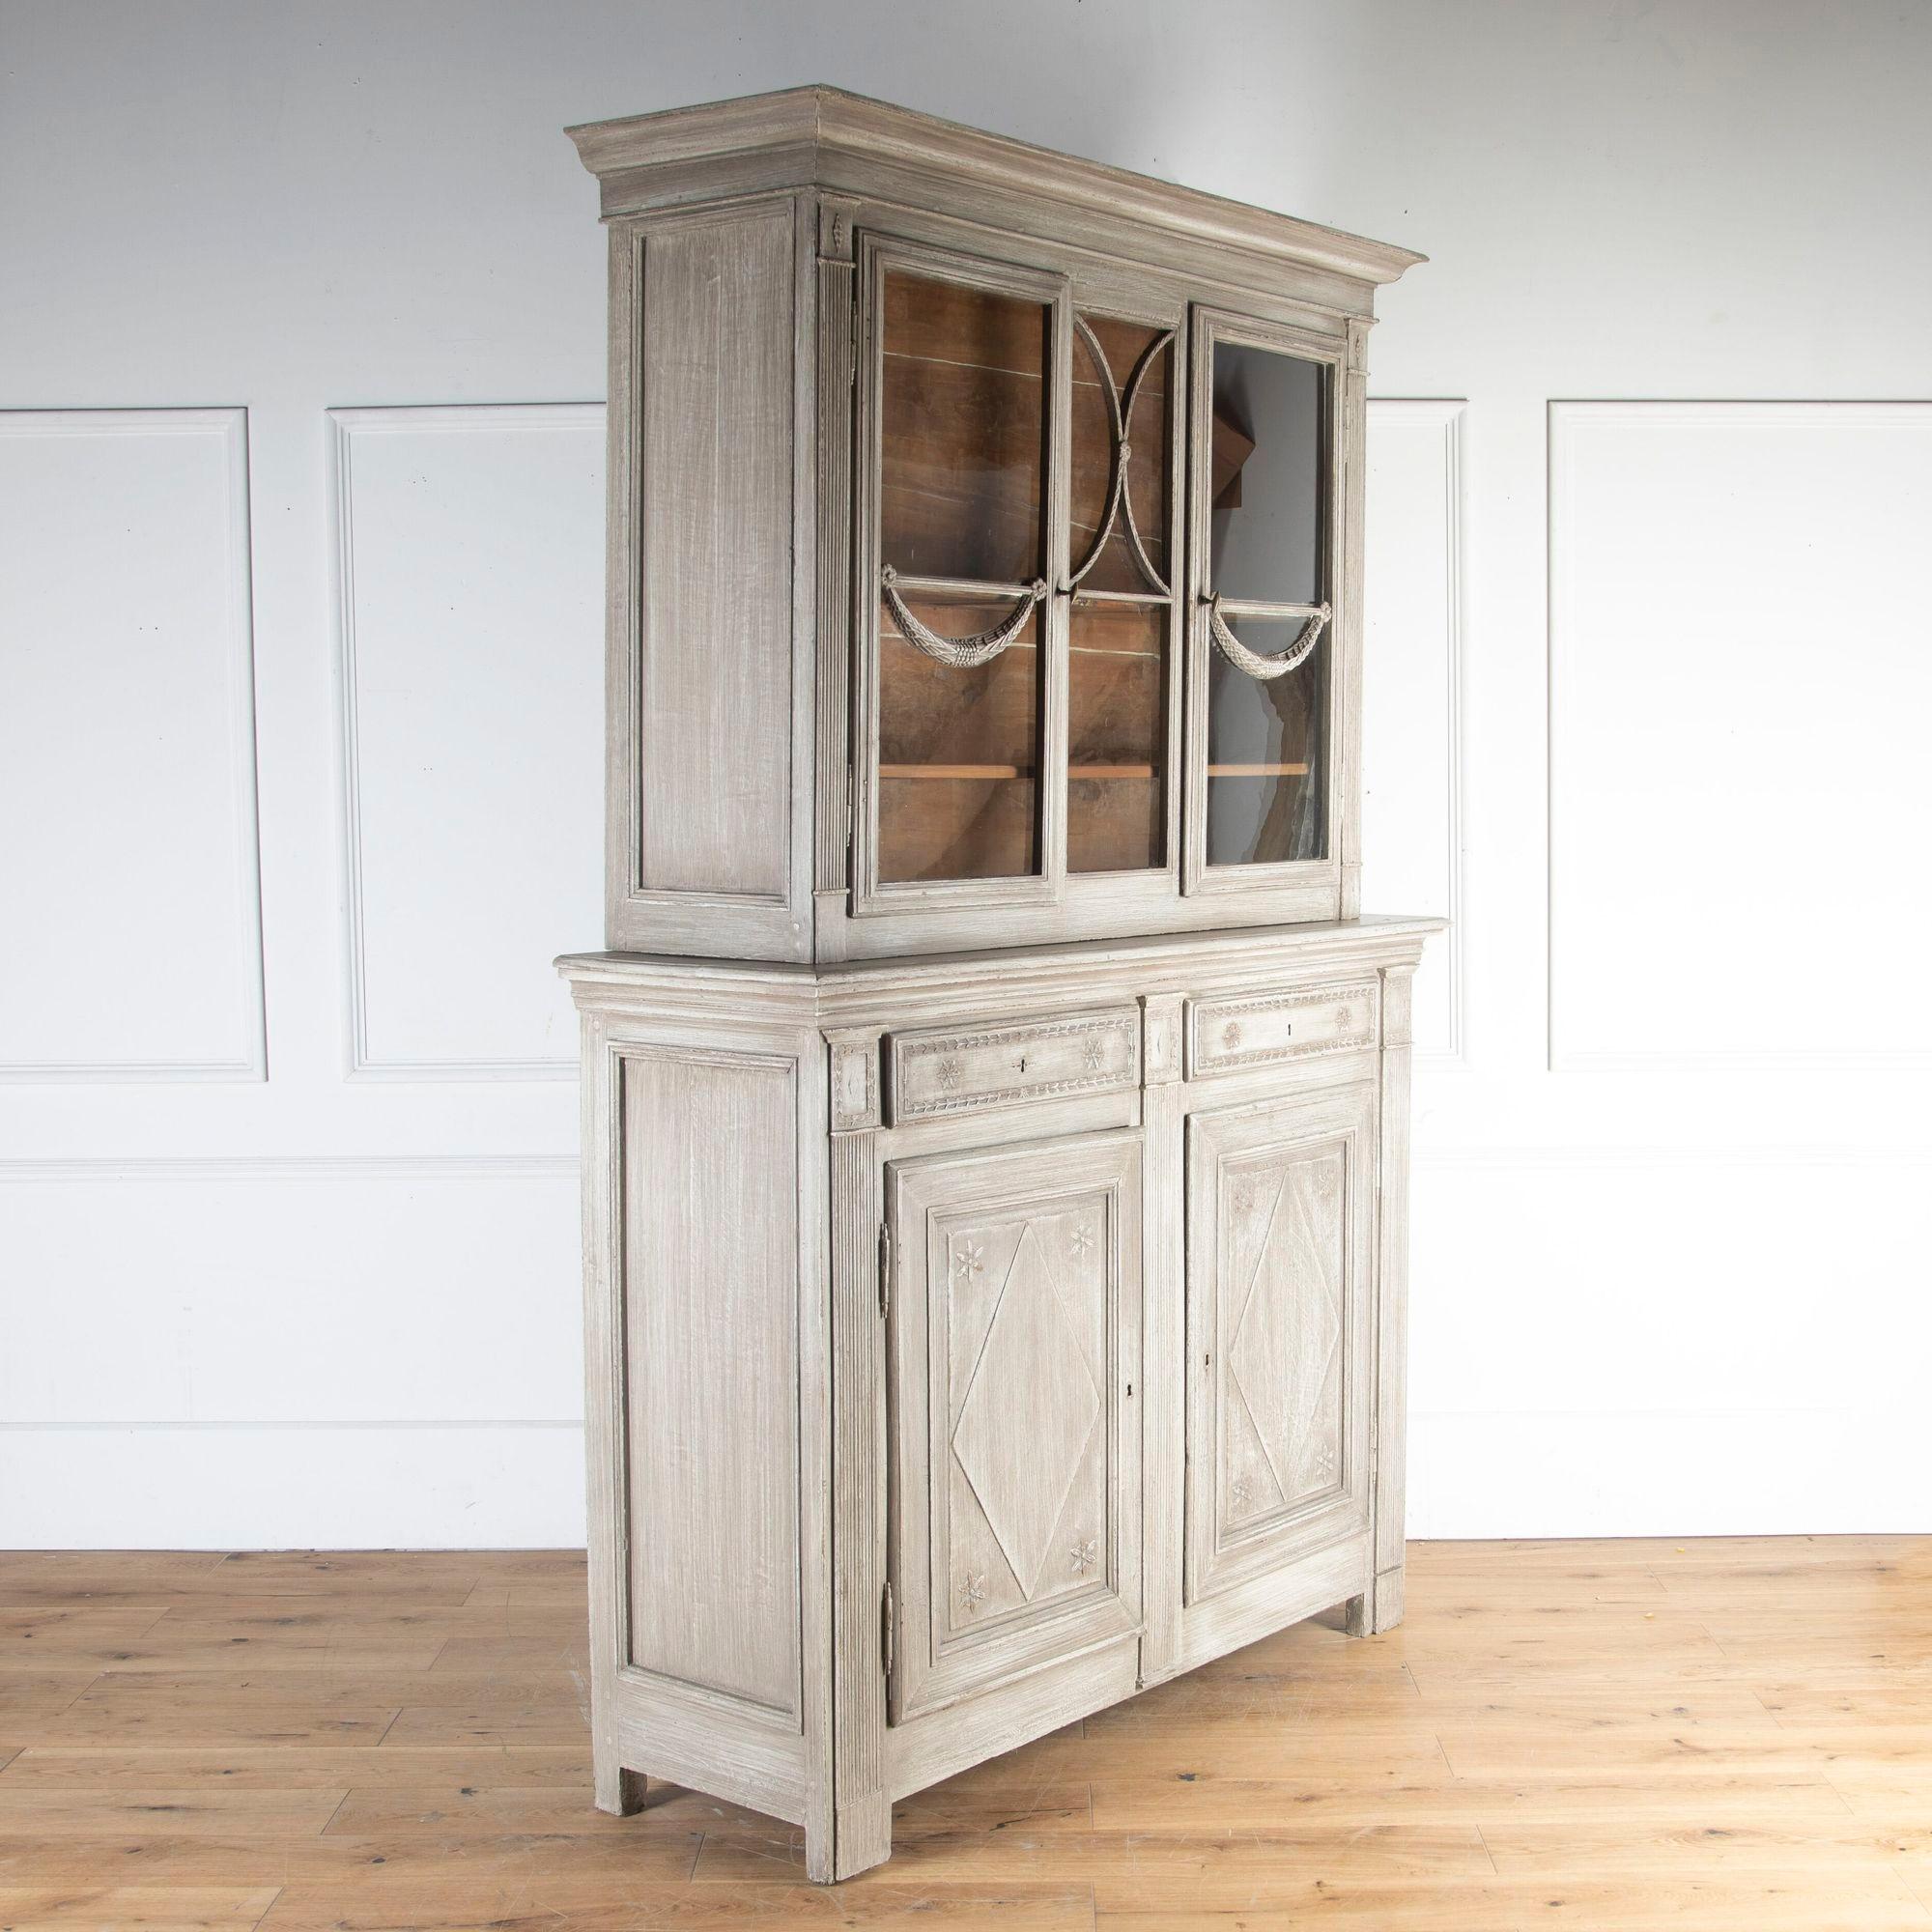 Early 19th Century French high-waisted cupboard.
This beautiful piece offers generous storage and unusual form. The top section with glazed doors featuring decorative carved swags and an unpainted interior offering several shelves. 
The bottom